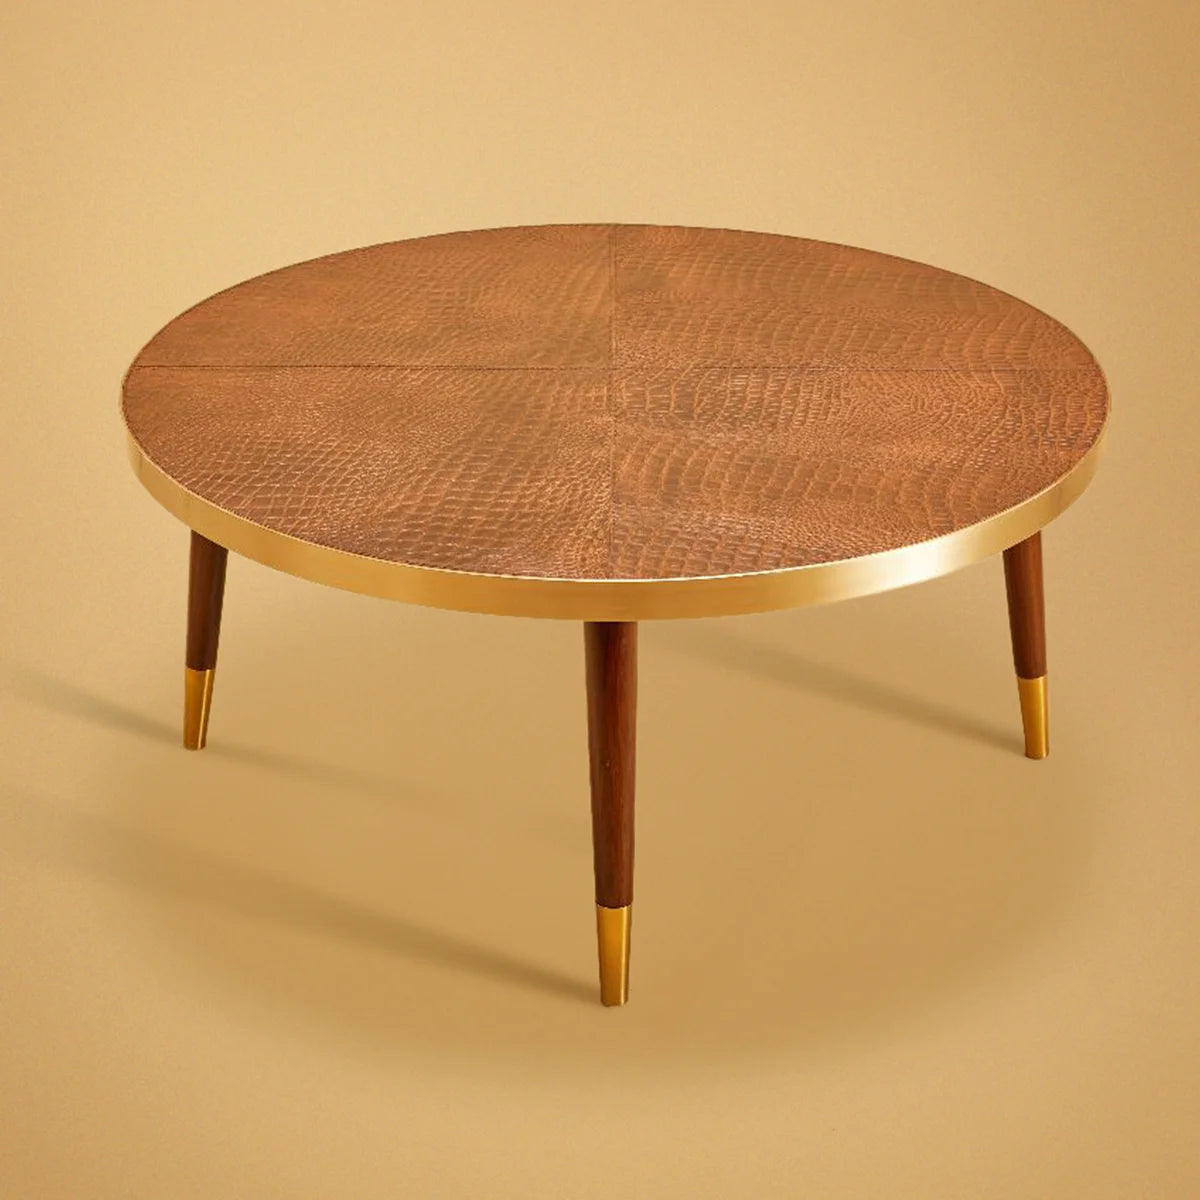 Round Centre Table- Embossed Leather Tan